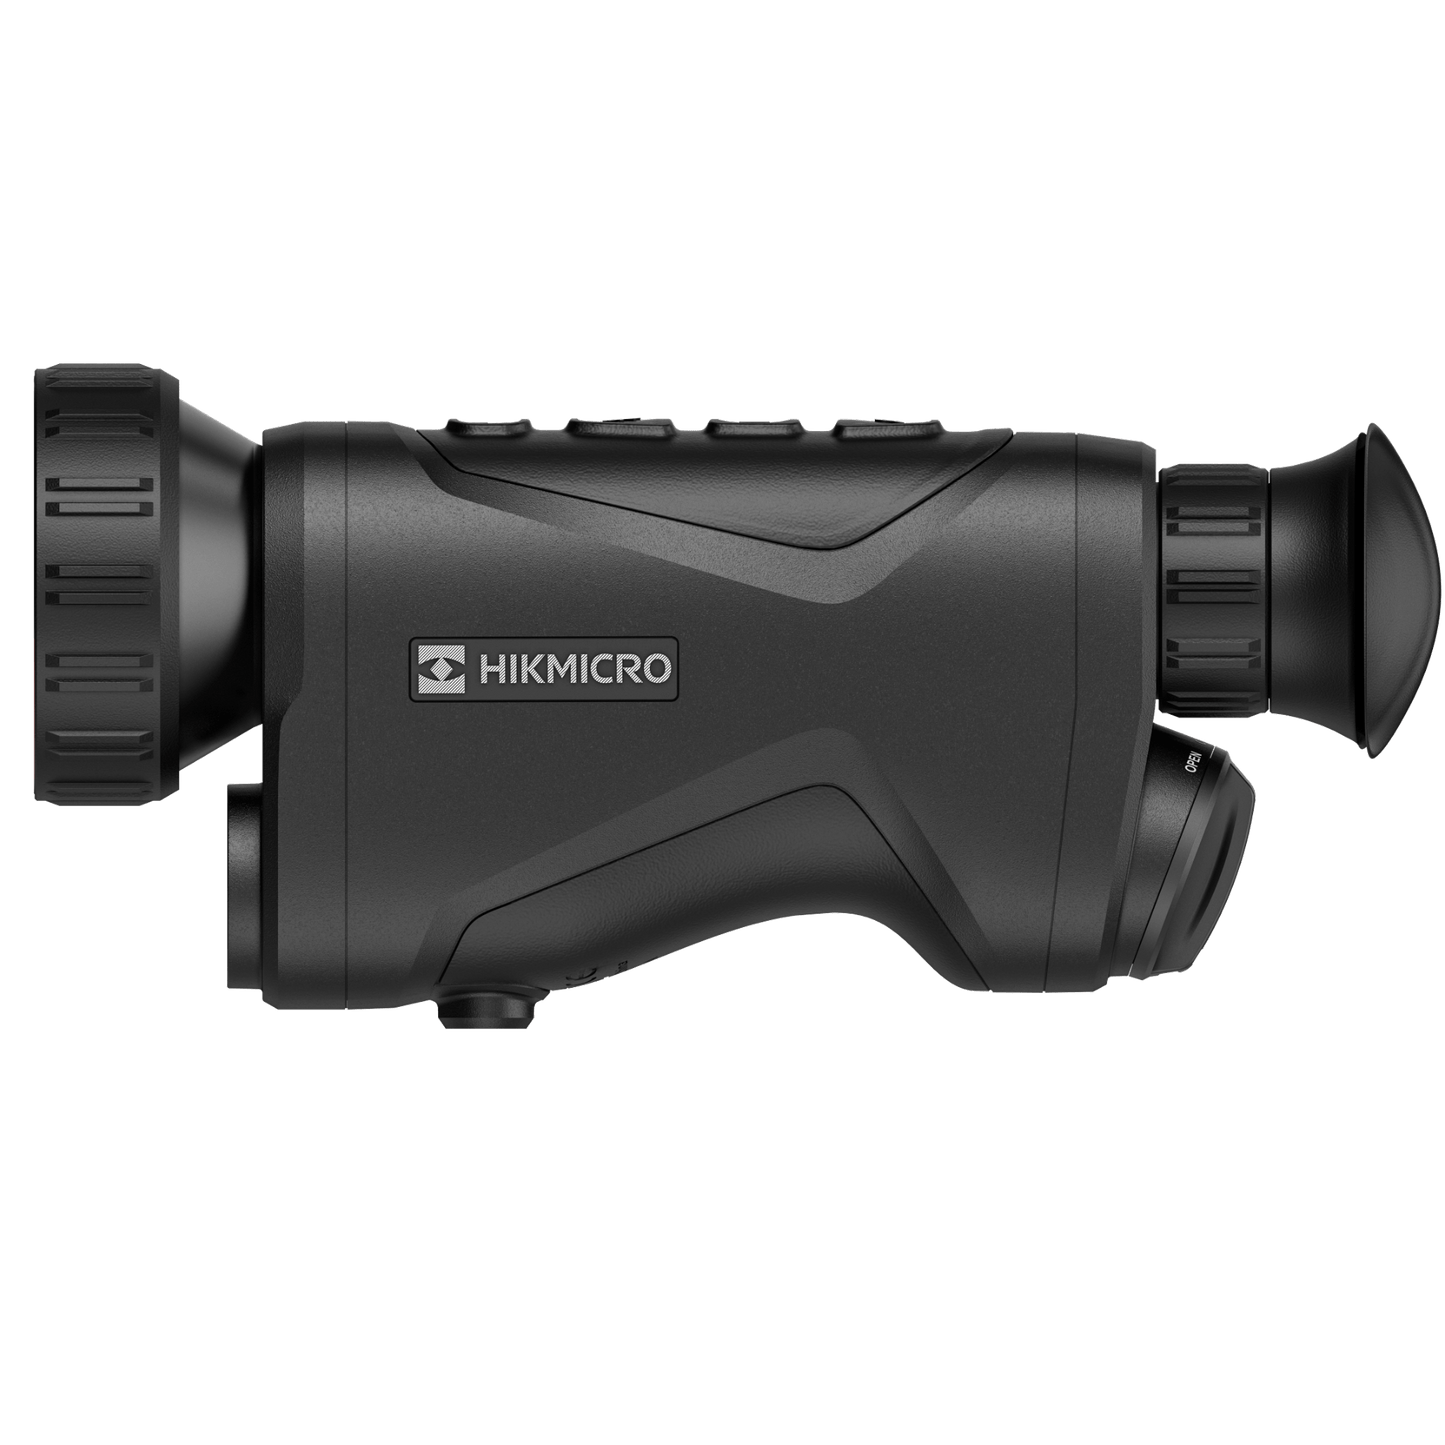 Side profile of the HikMicro Condor CQ50L thermal monocular. Featuring a sleek design and built-in rangefinder, it stands out as a leading choice for hunting, as well as security and surveillance purposes. Renowned as one of the best thermal monoculars with rangefinder capabilities